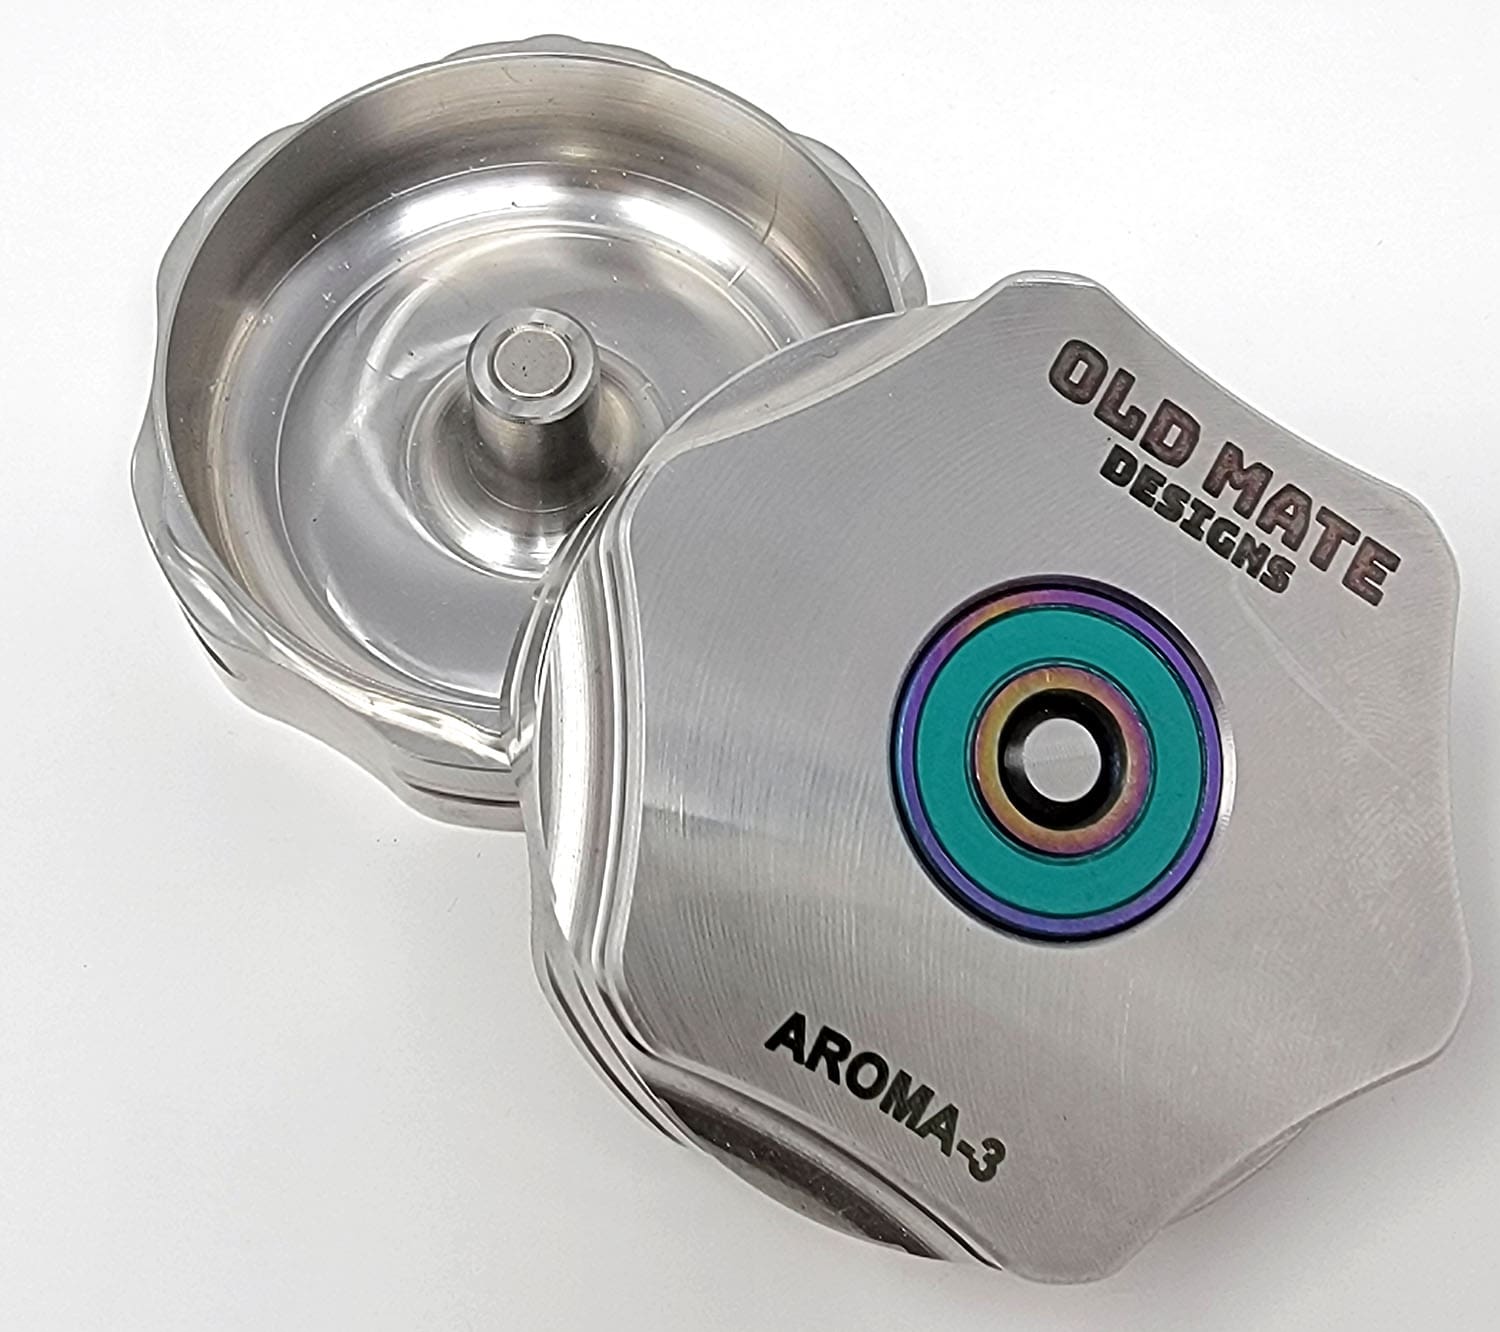 Stainless Steel Grinder with spinning bearing - the Old Mate Aroma 3